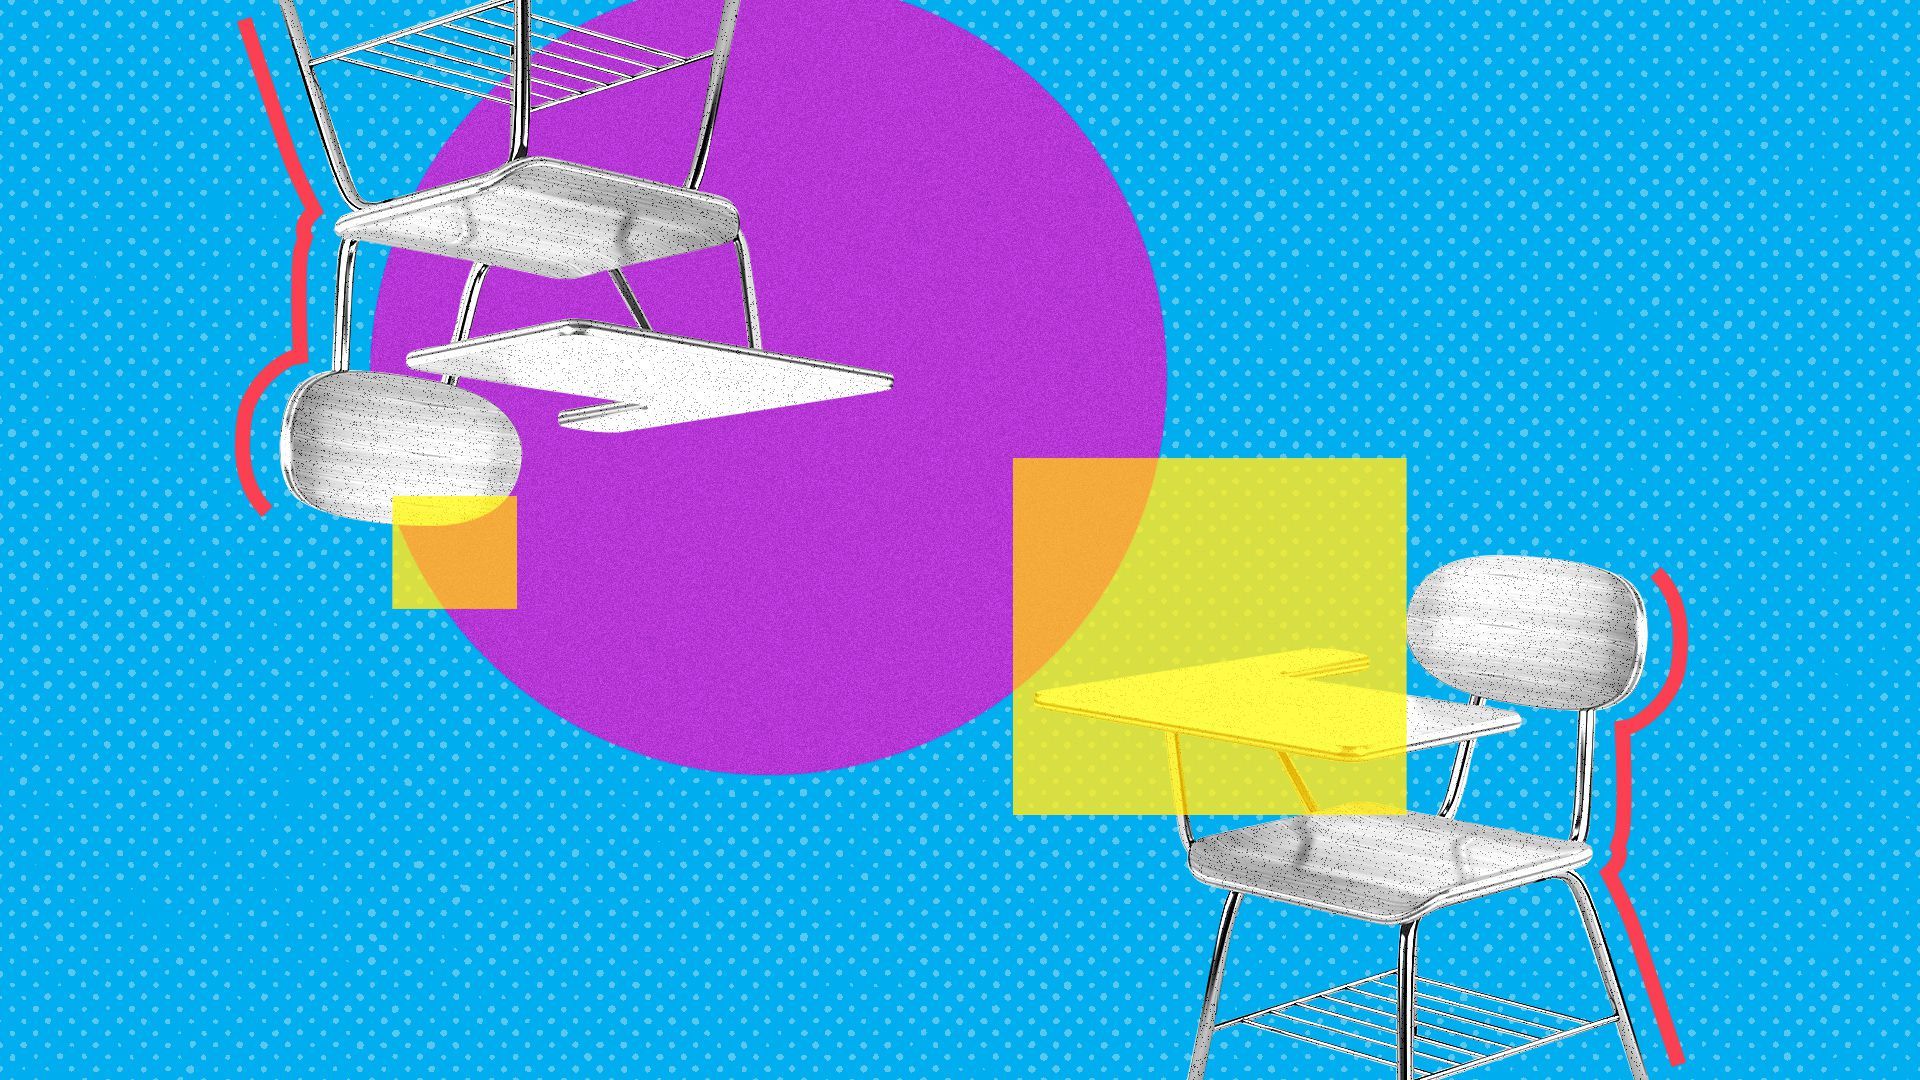 Illustration of two desks surrounded by colorful shapes. 